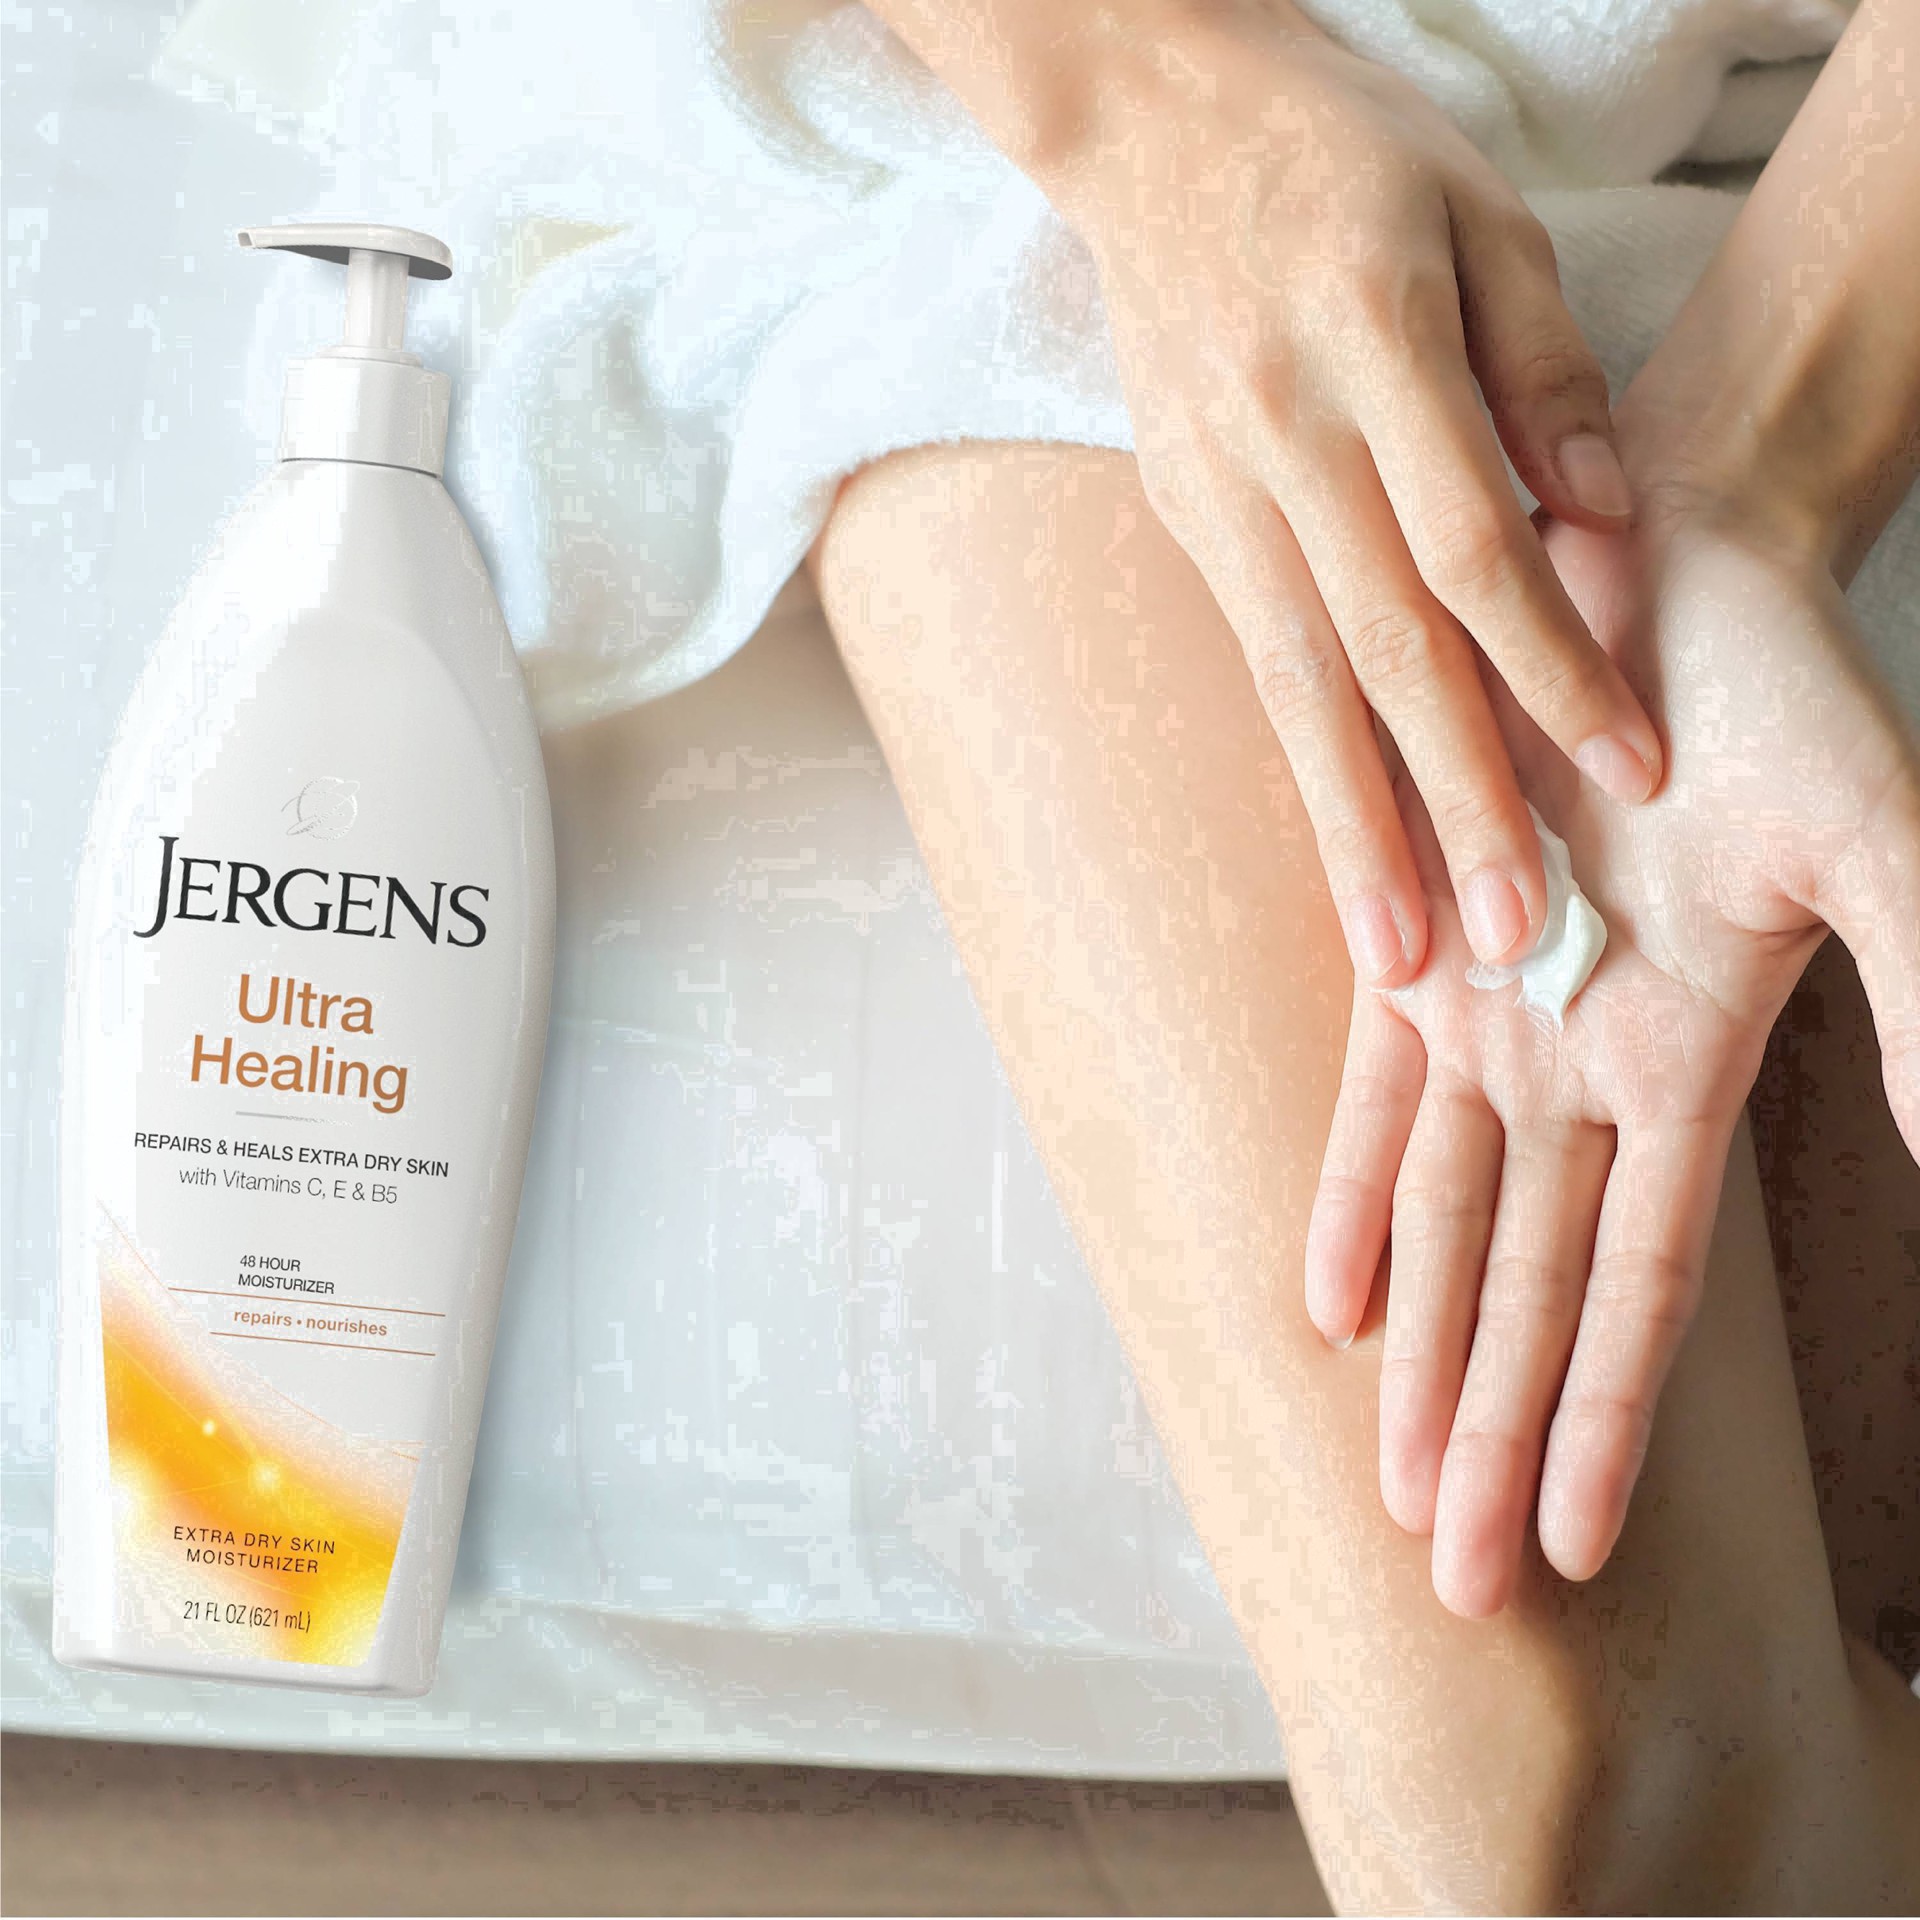 slide 23 of 67, Jergens Hand and Body Lotion, Dry Skin Moisturizer with Vitamins C,E, and B5, 21 fl oz